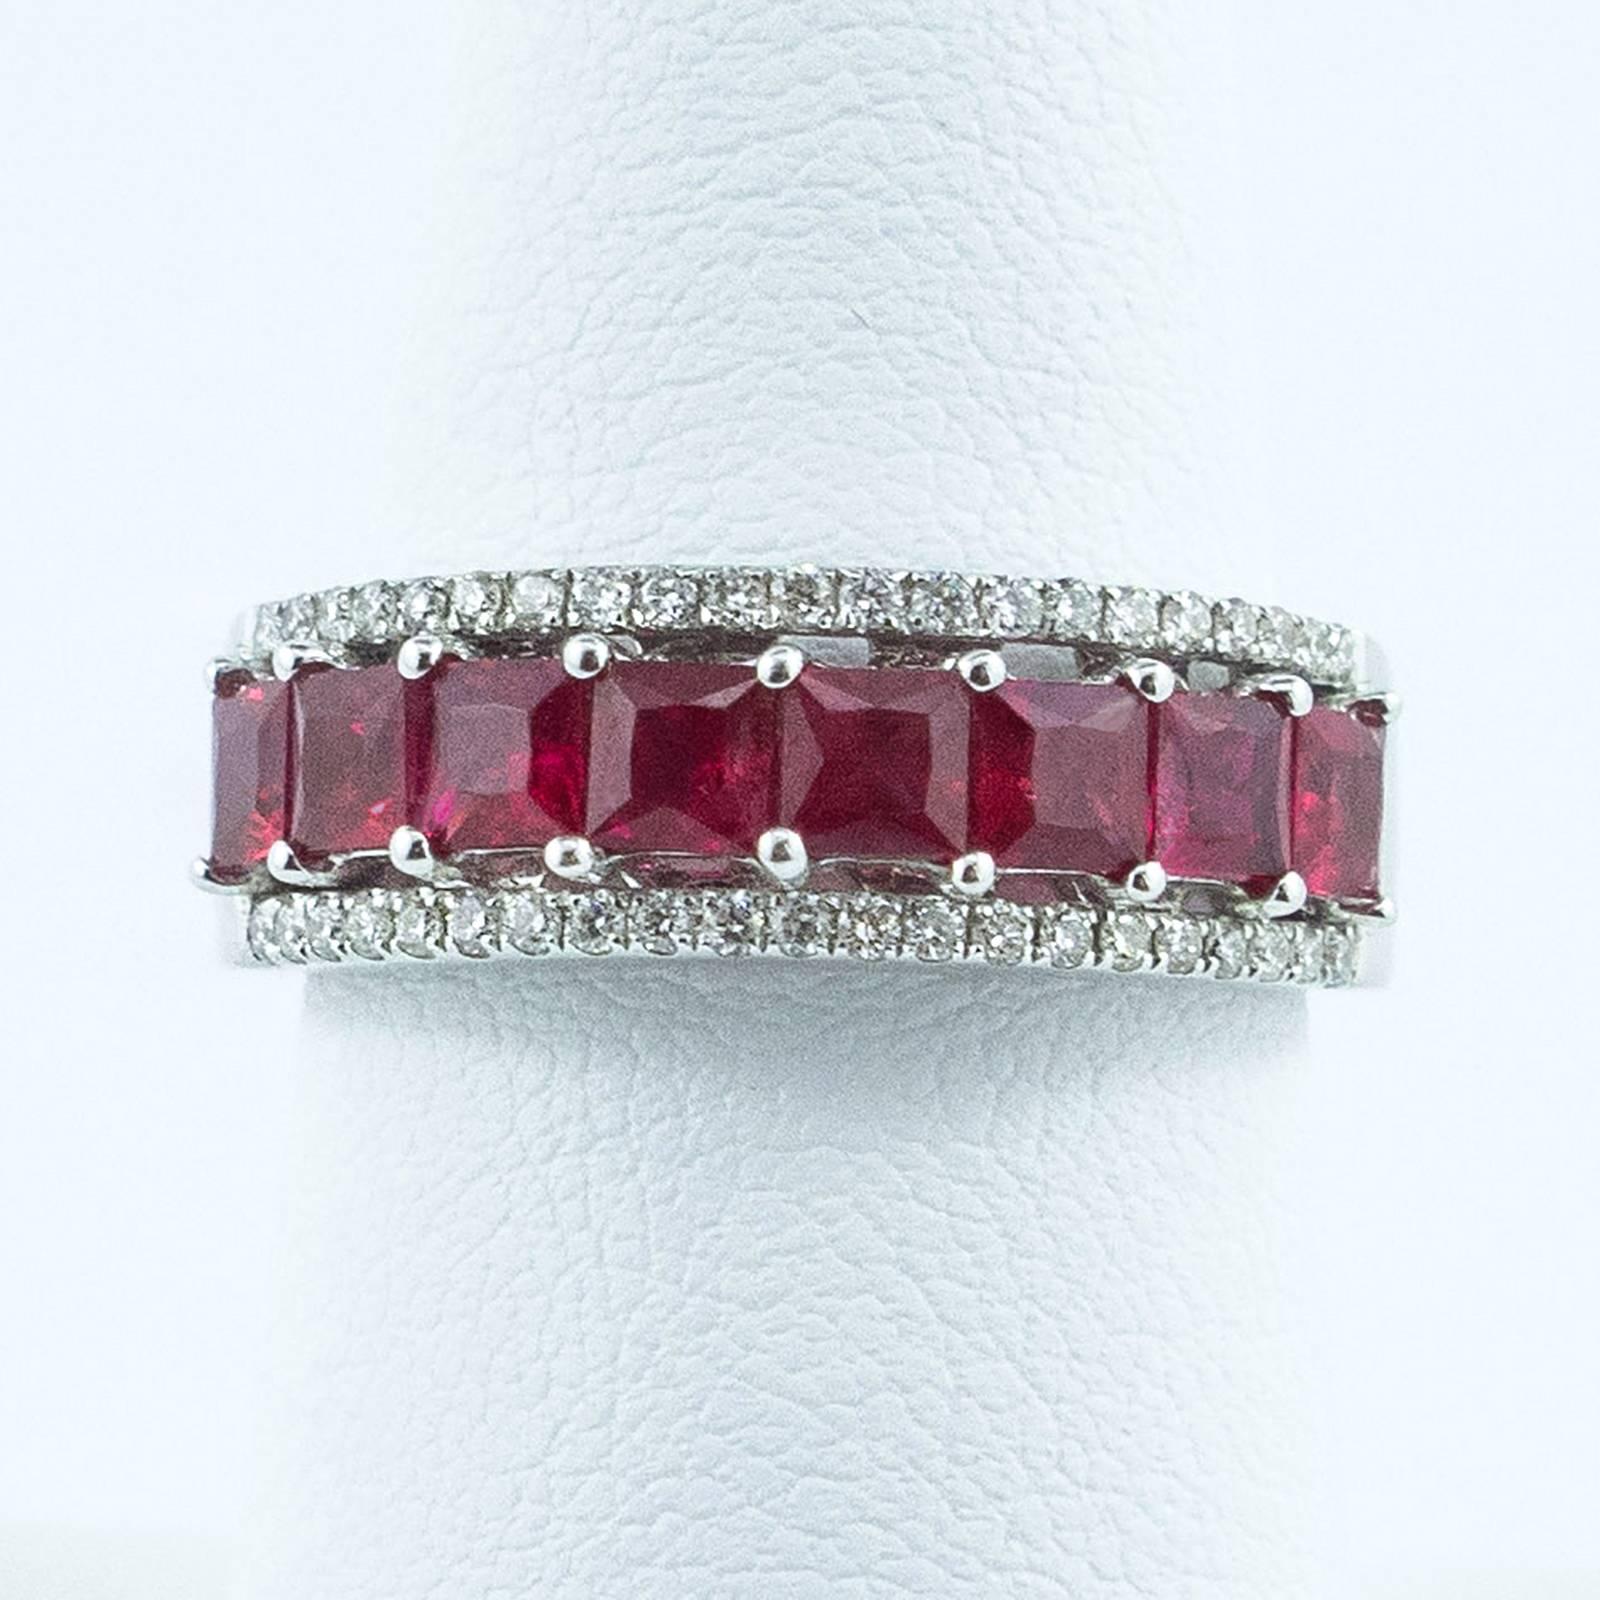 A striking half eternity band is centred with 8 Princess Cut natural Red Rubies totaling 1.81 carat with petite guards of clear, prong set Diamonds totaling 0.23 carat by gauge and formula.

The top of the ring measures 8mm north to south on the